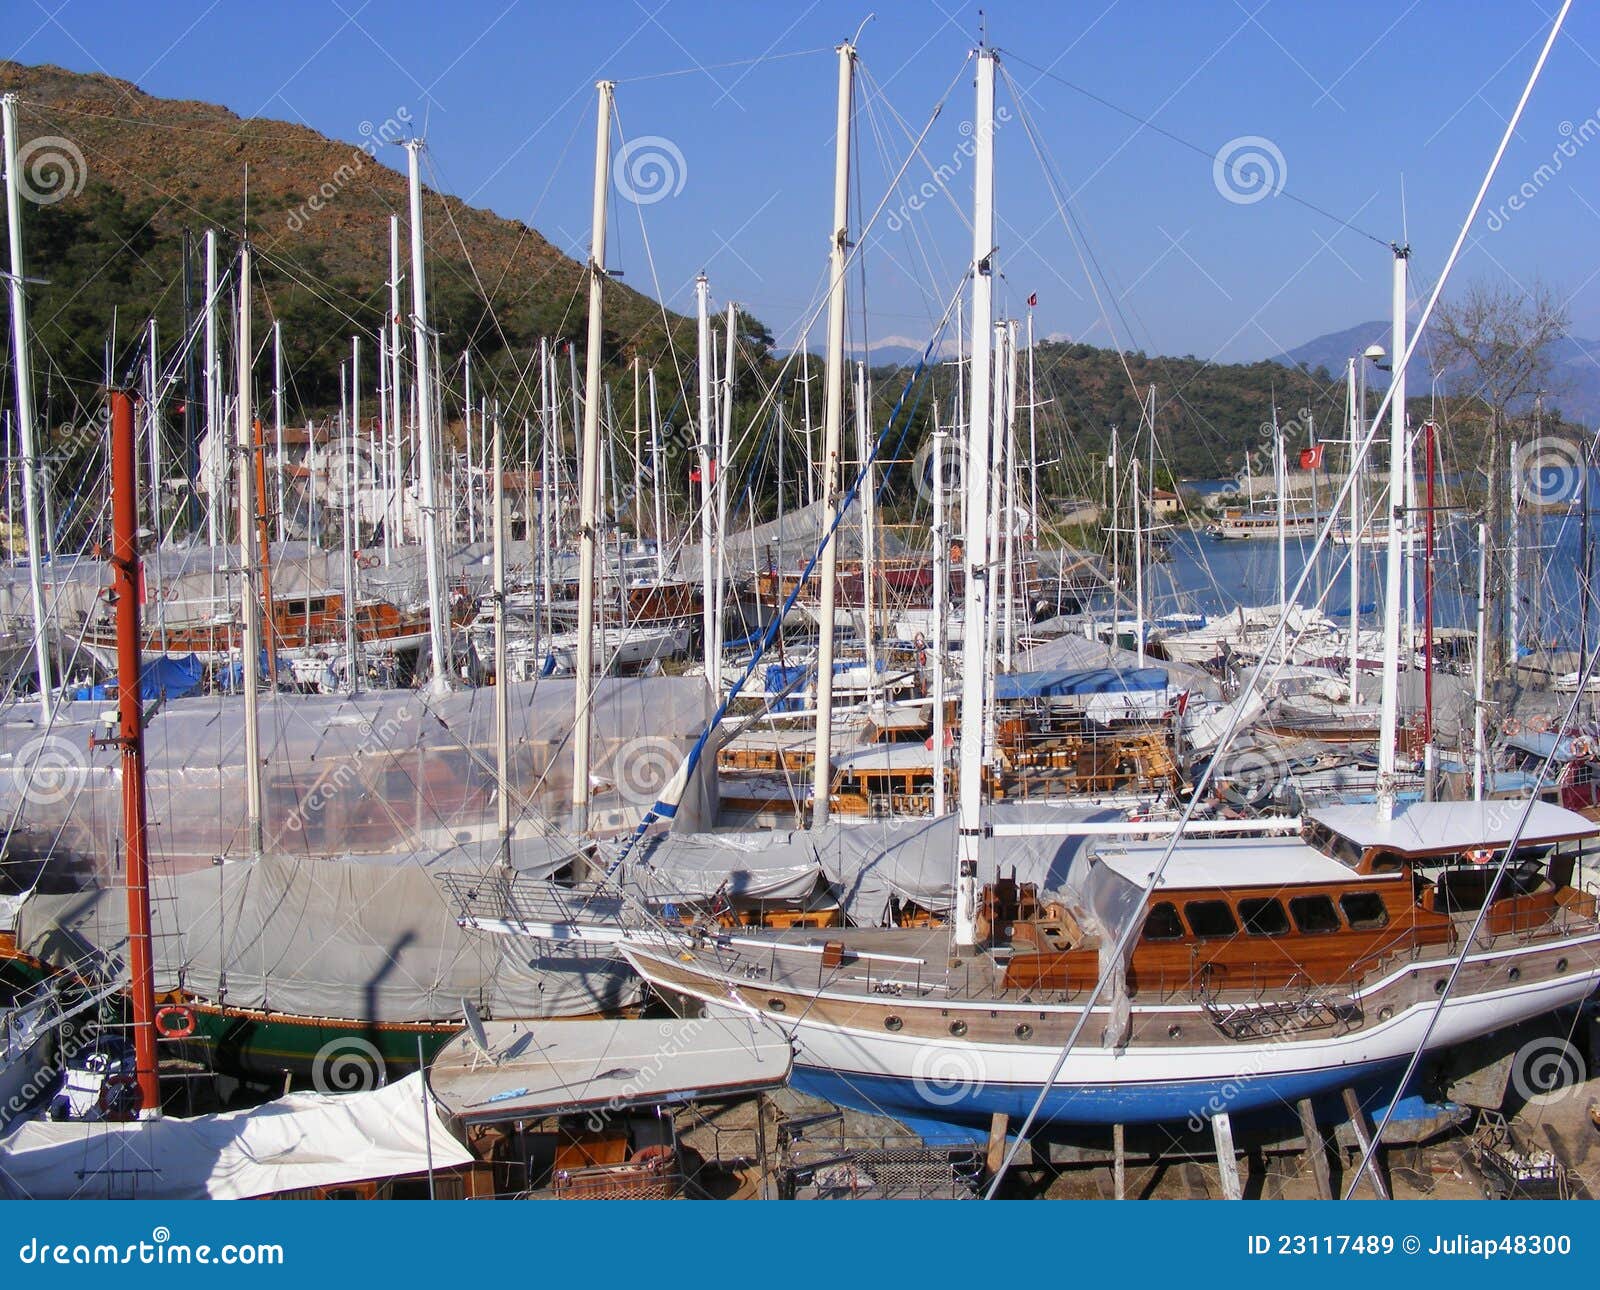 ship building turkey stock image. image of wooden